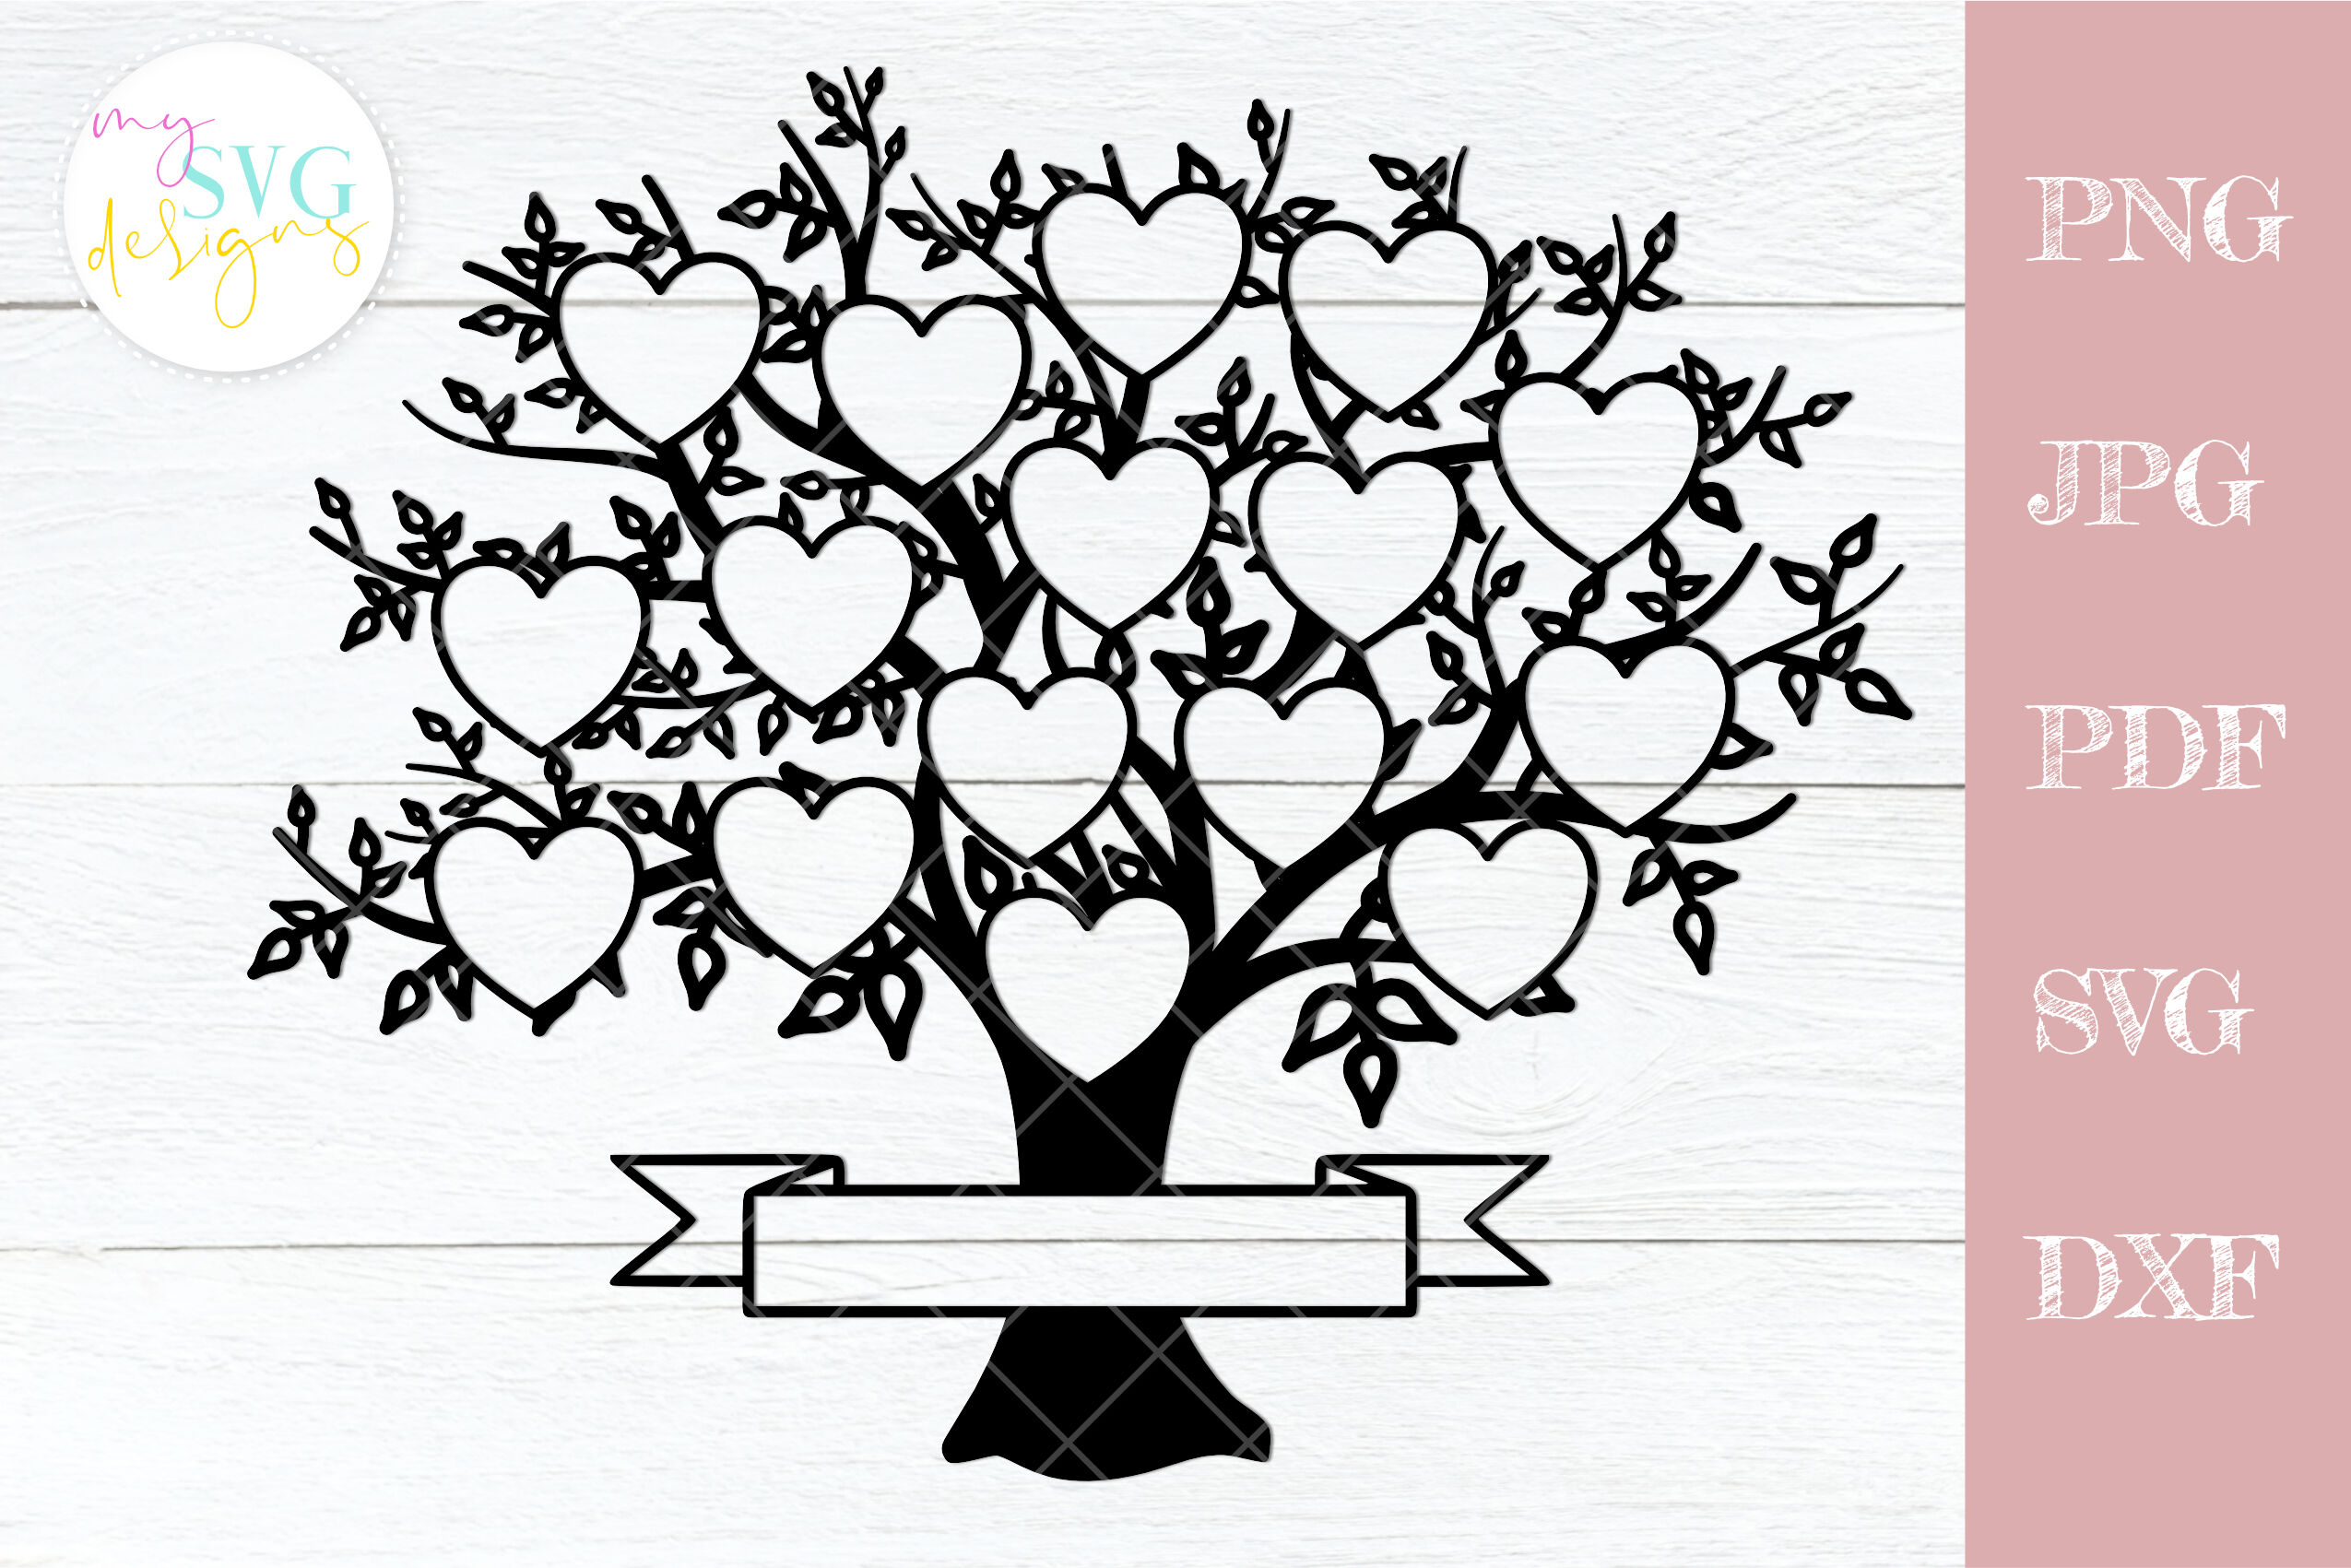 Family tree svg 16 members, svg family tree, family reunion svg By